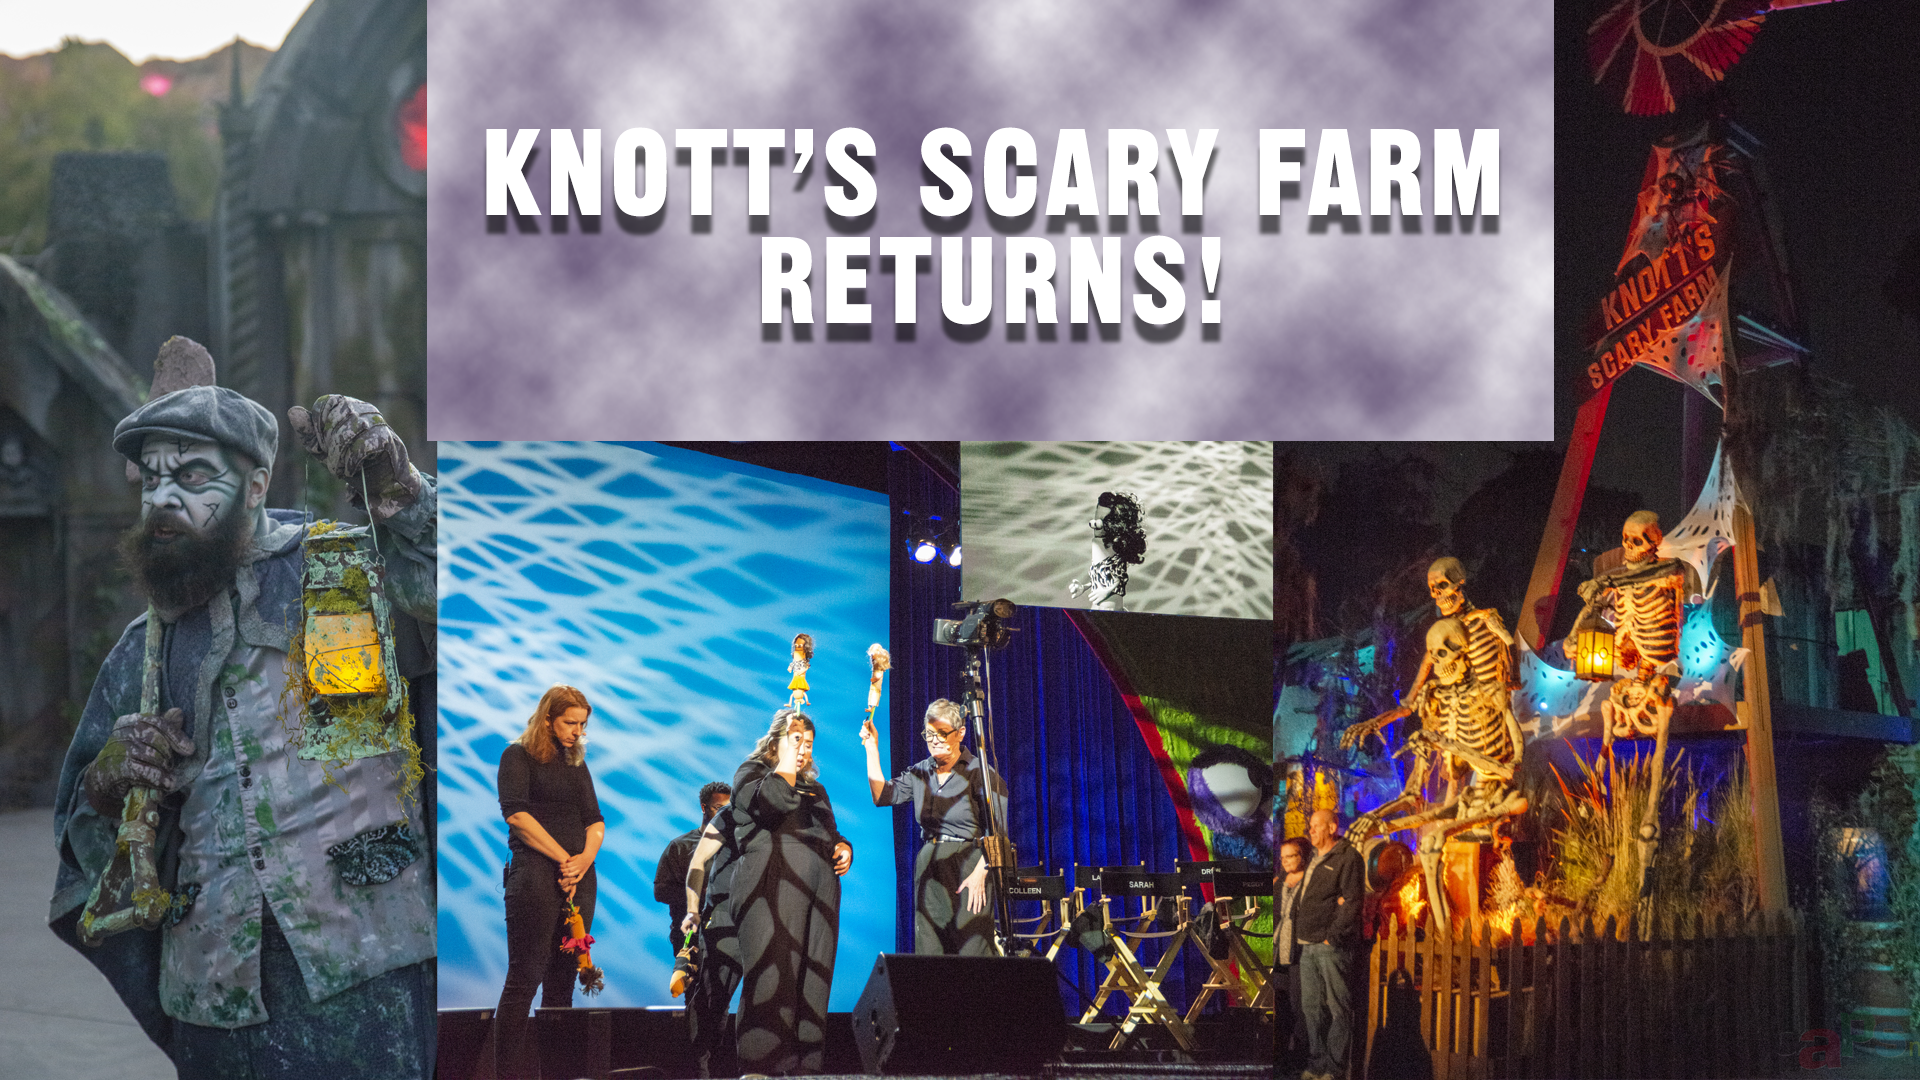 Haunts Return to Knott’s Scary Farm with Lots of New Immersive Entertainment in 2021